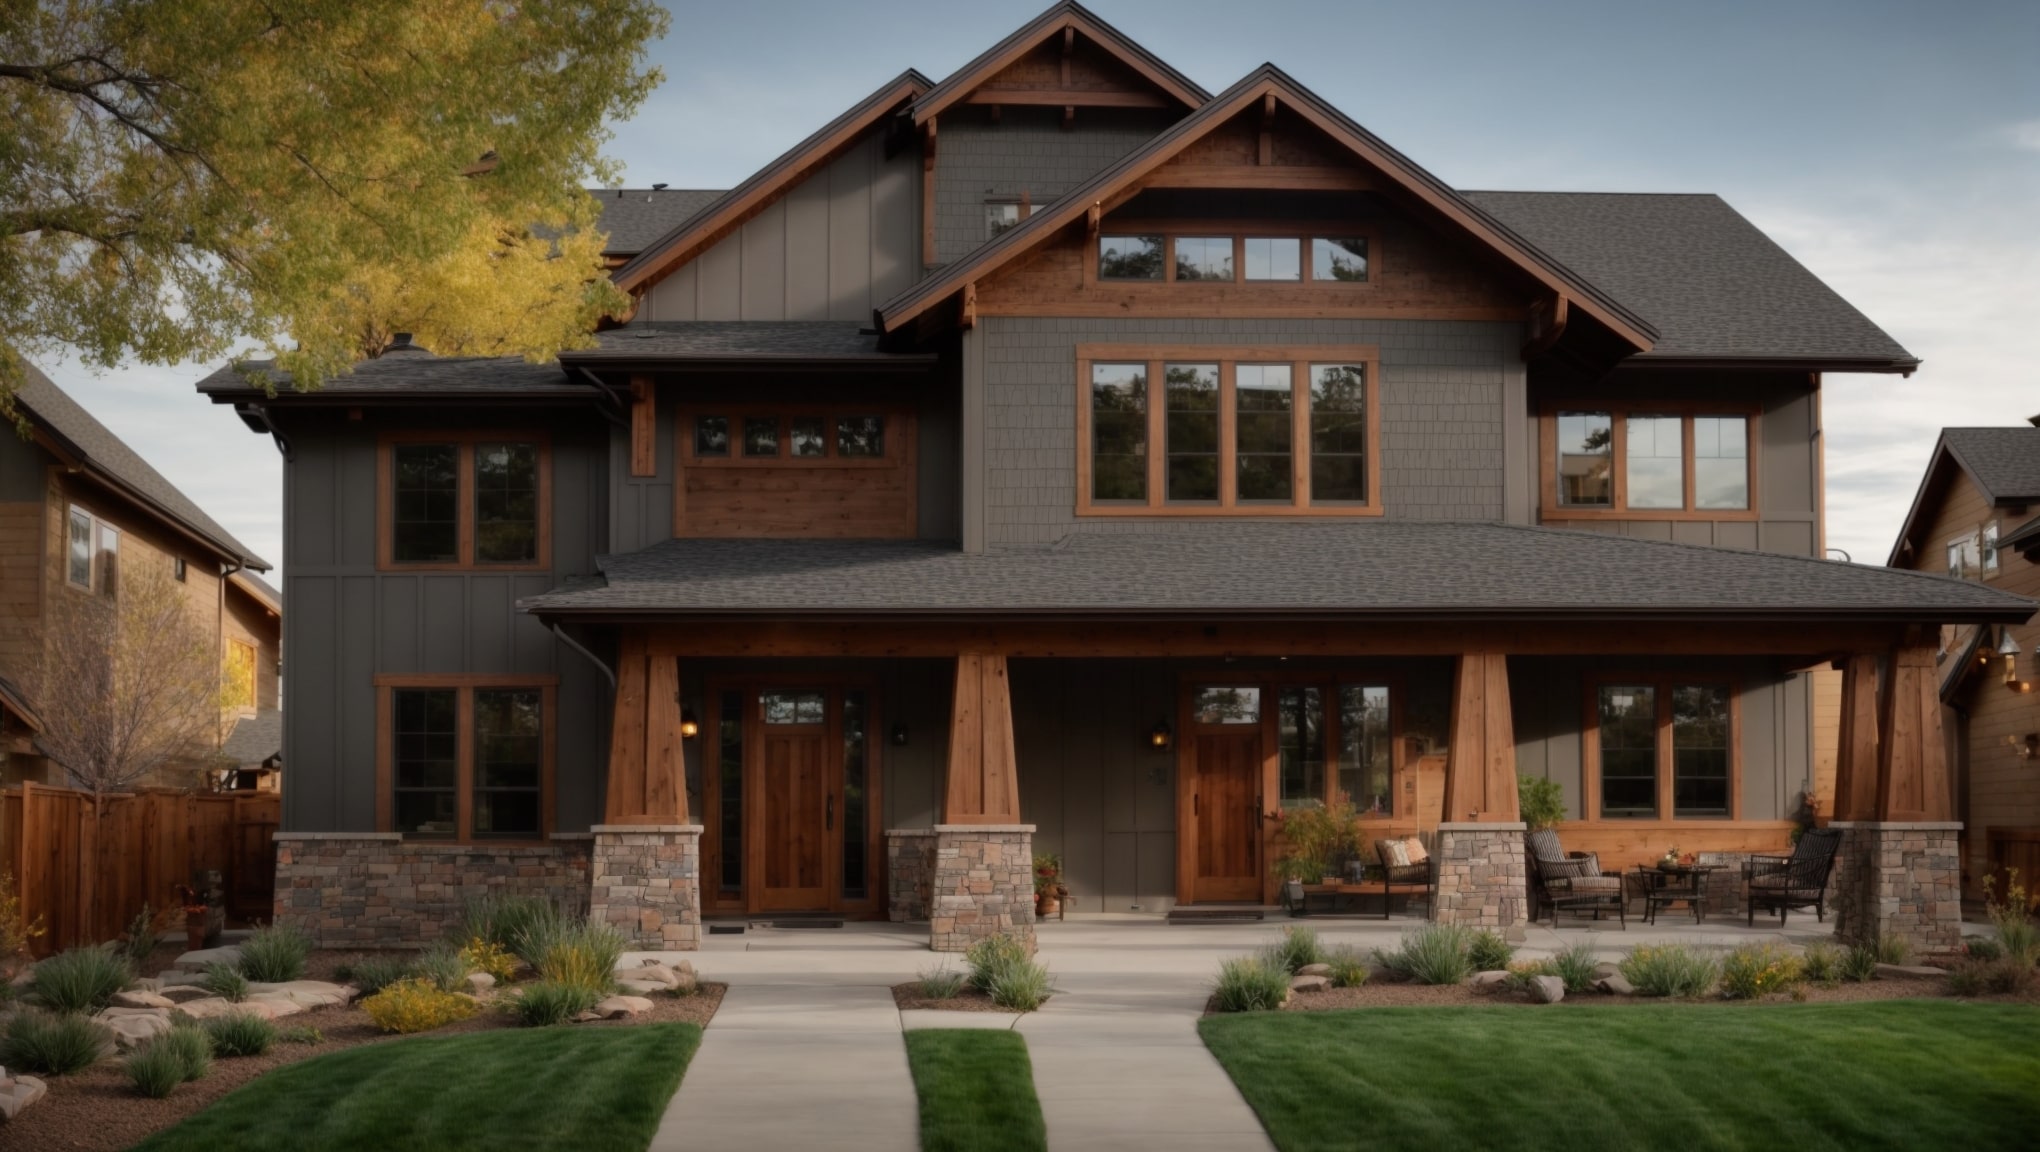 A contemporary Craftsman-style home in Longmont, Colorado, adorned with durable James Hardie Siding.